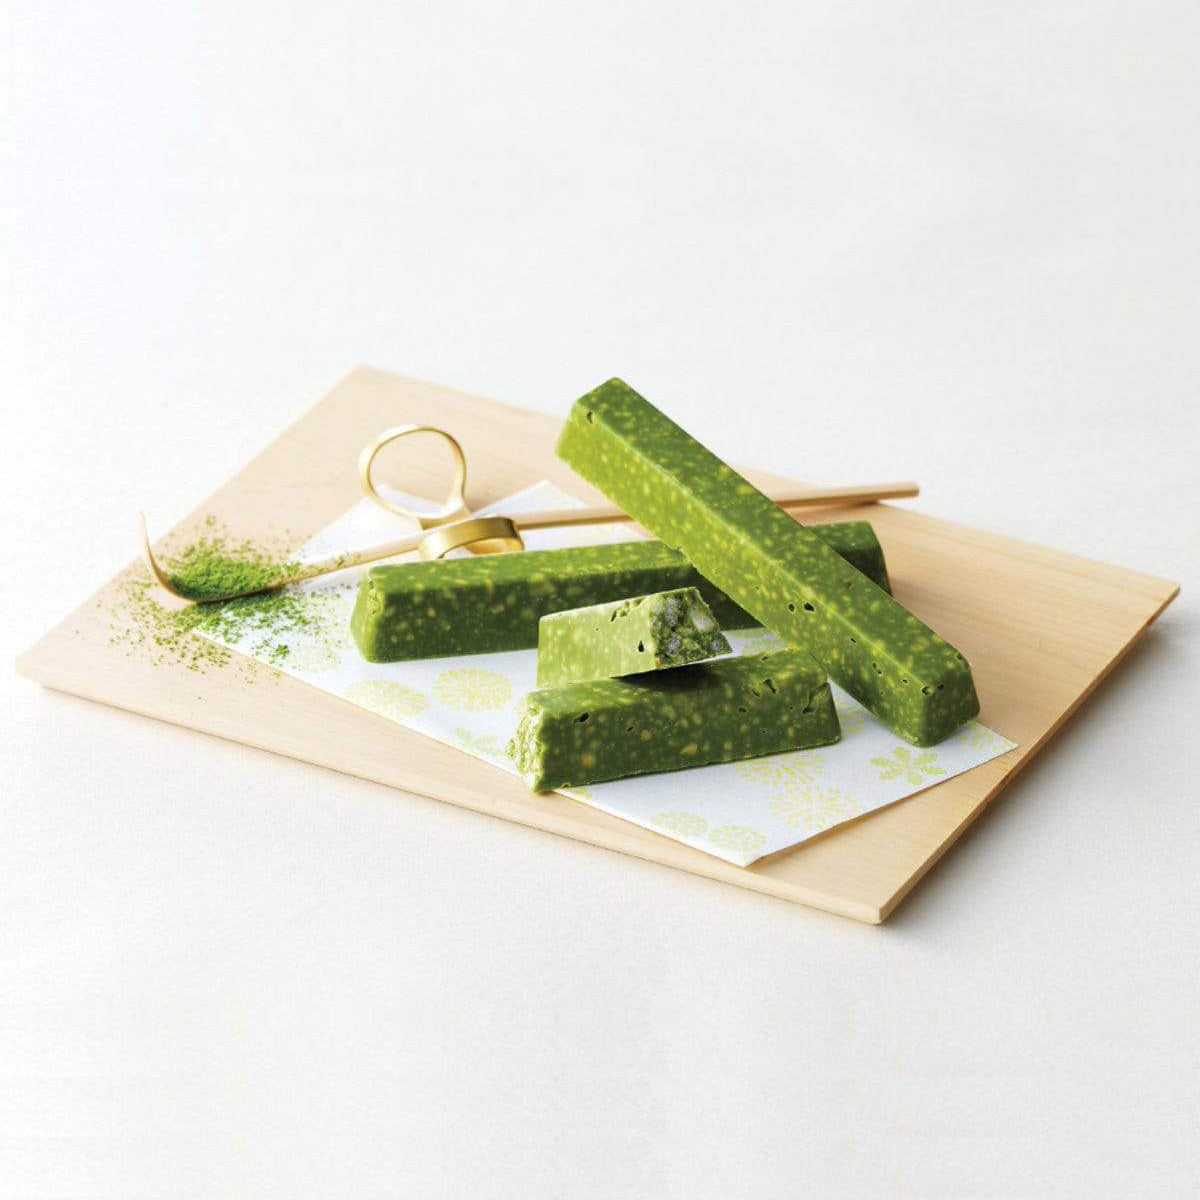 ROYCE' Chocolate - Matcha Bar Chocolate - Image shows green chocolate bars on a white printed paper with accents of green tea powder, a wooden stick, and a brown wooden platform. Background is in white.